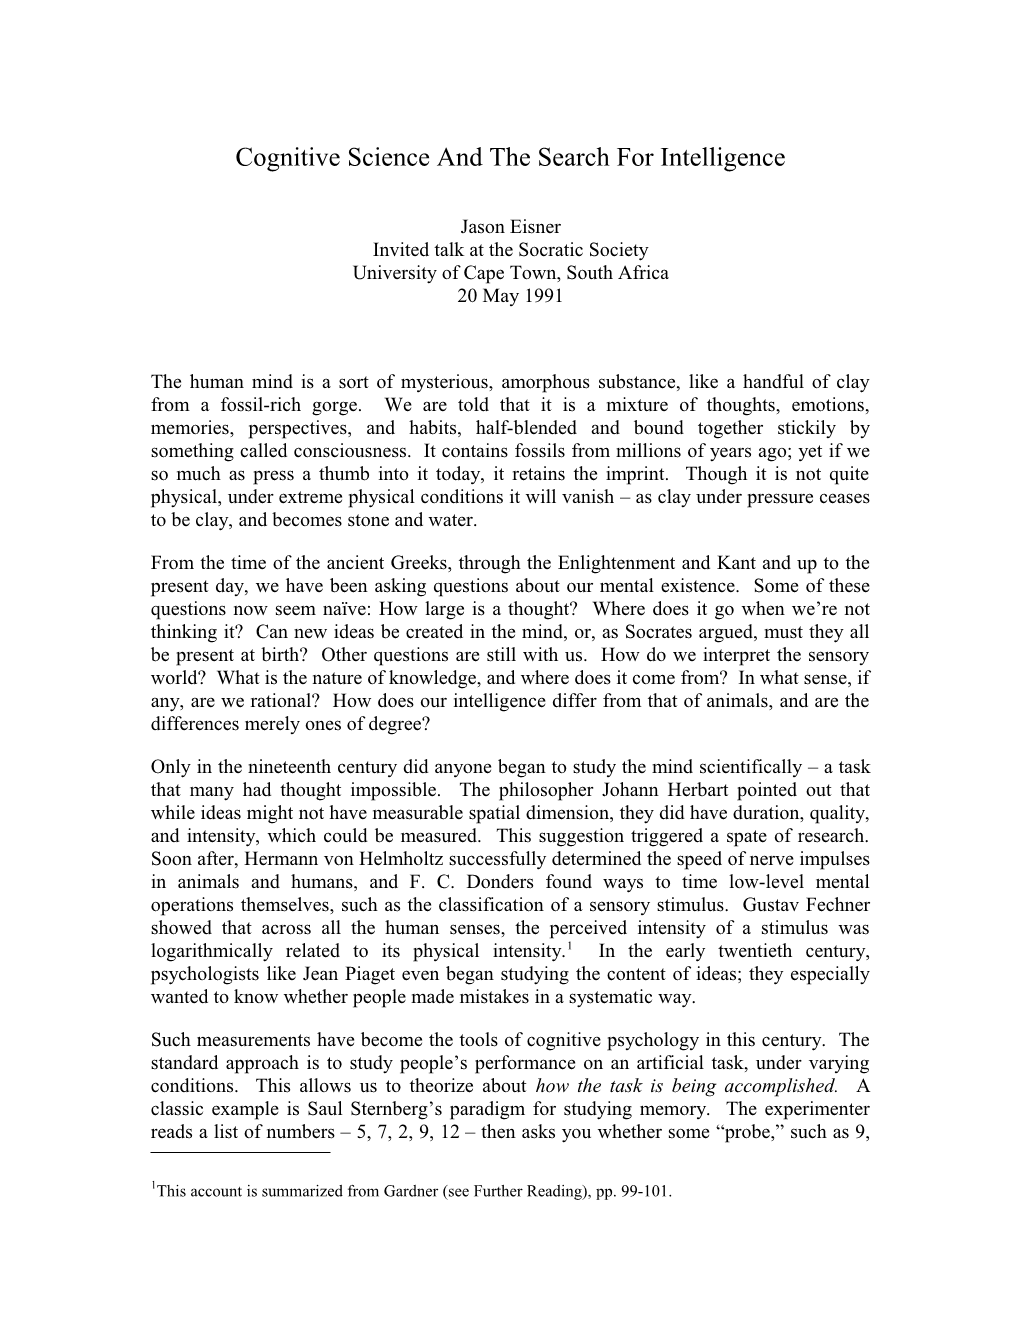 Cognitive Science and the Search for Intelligence